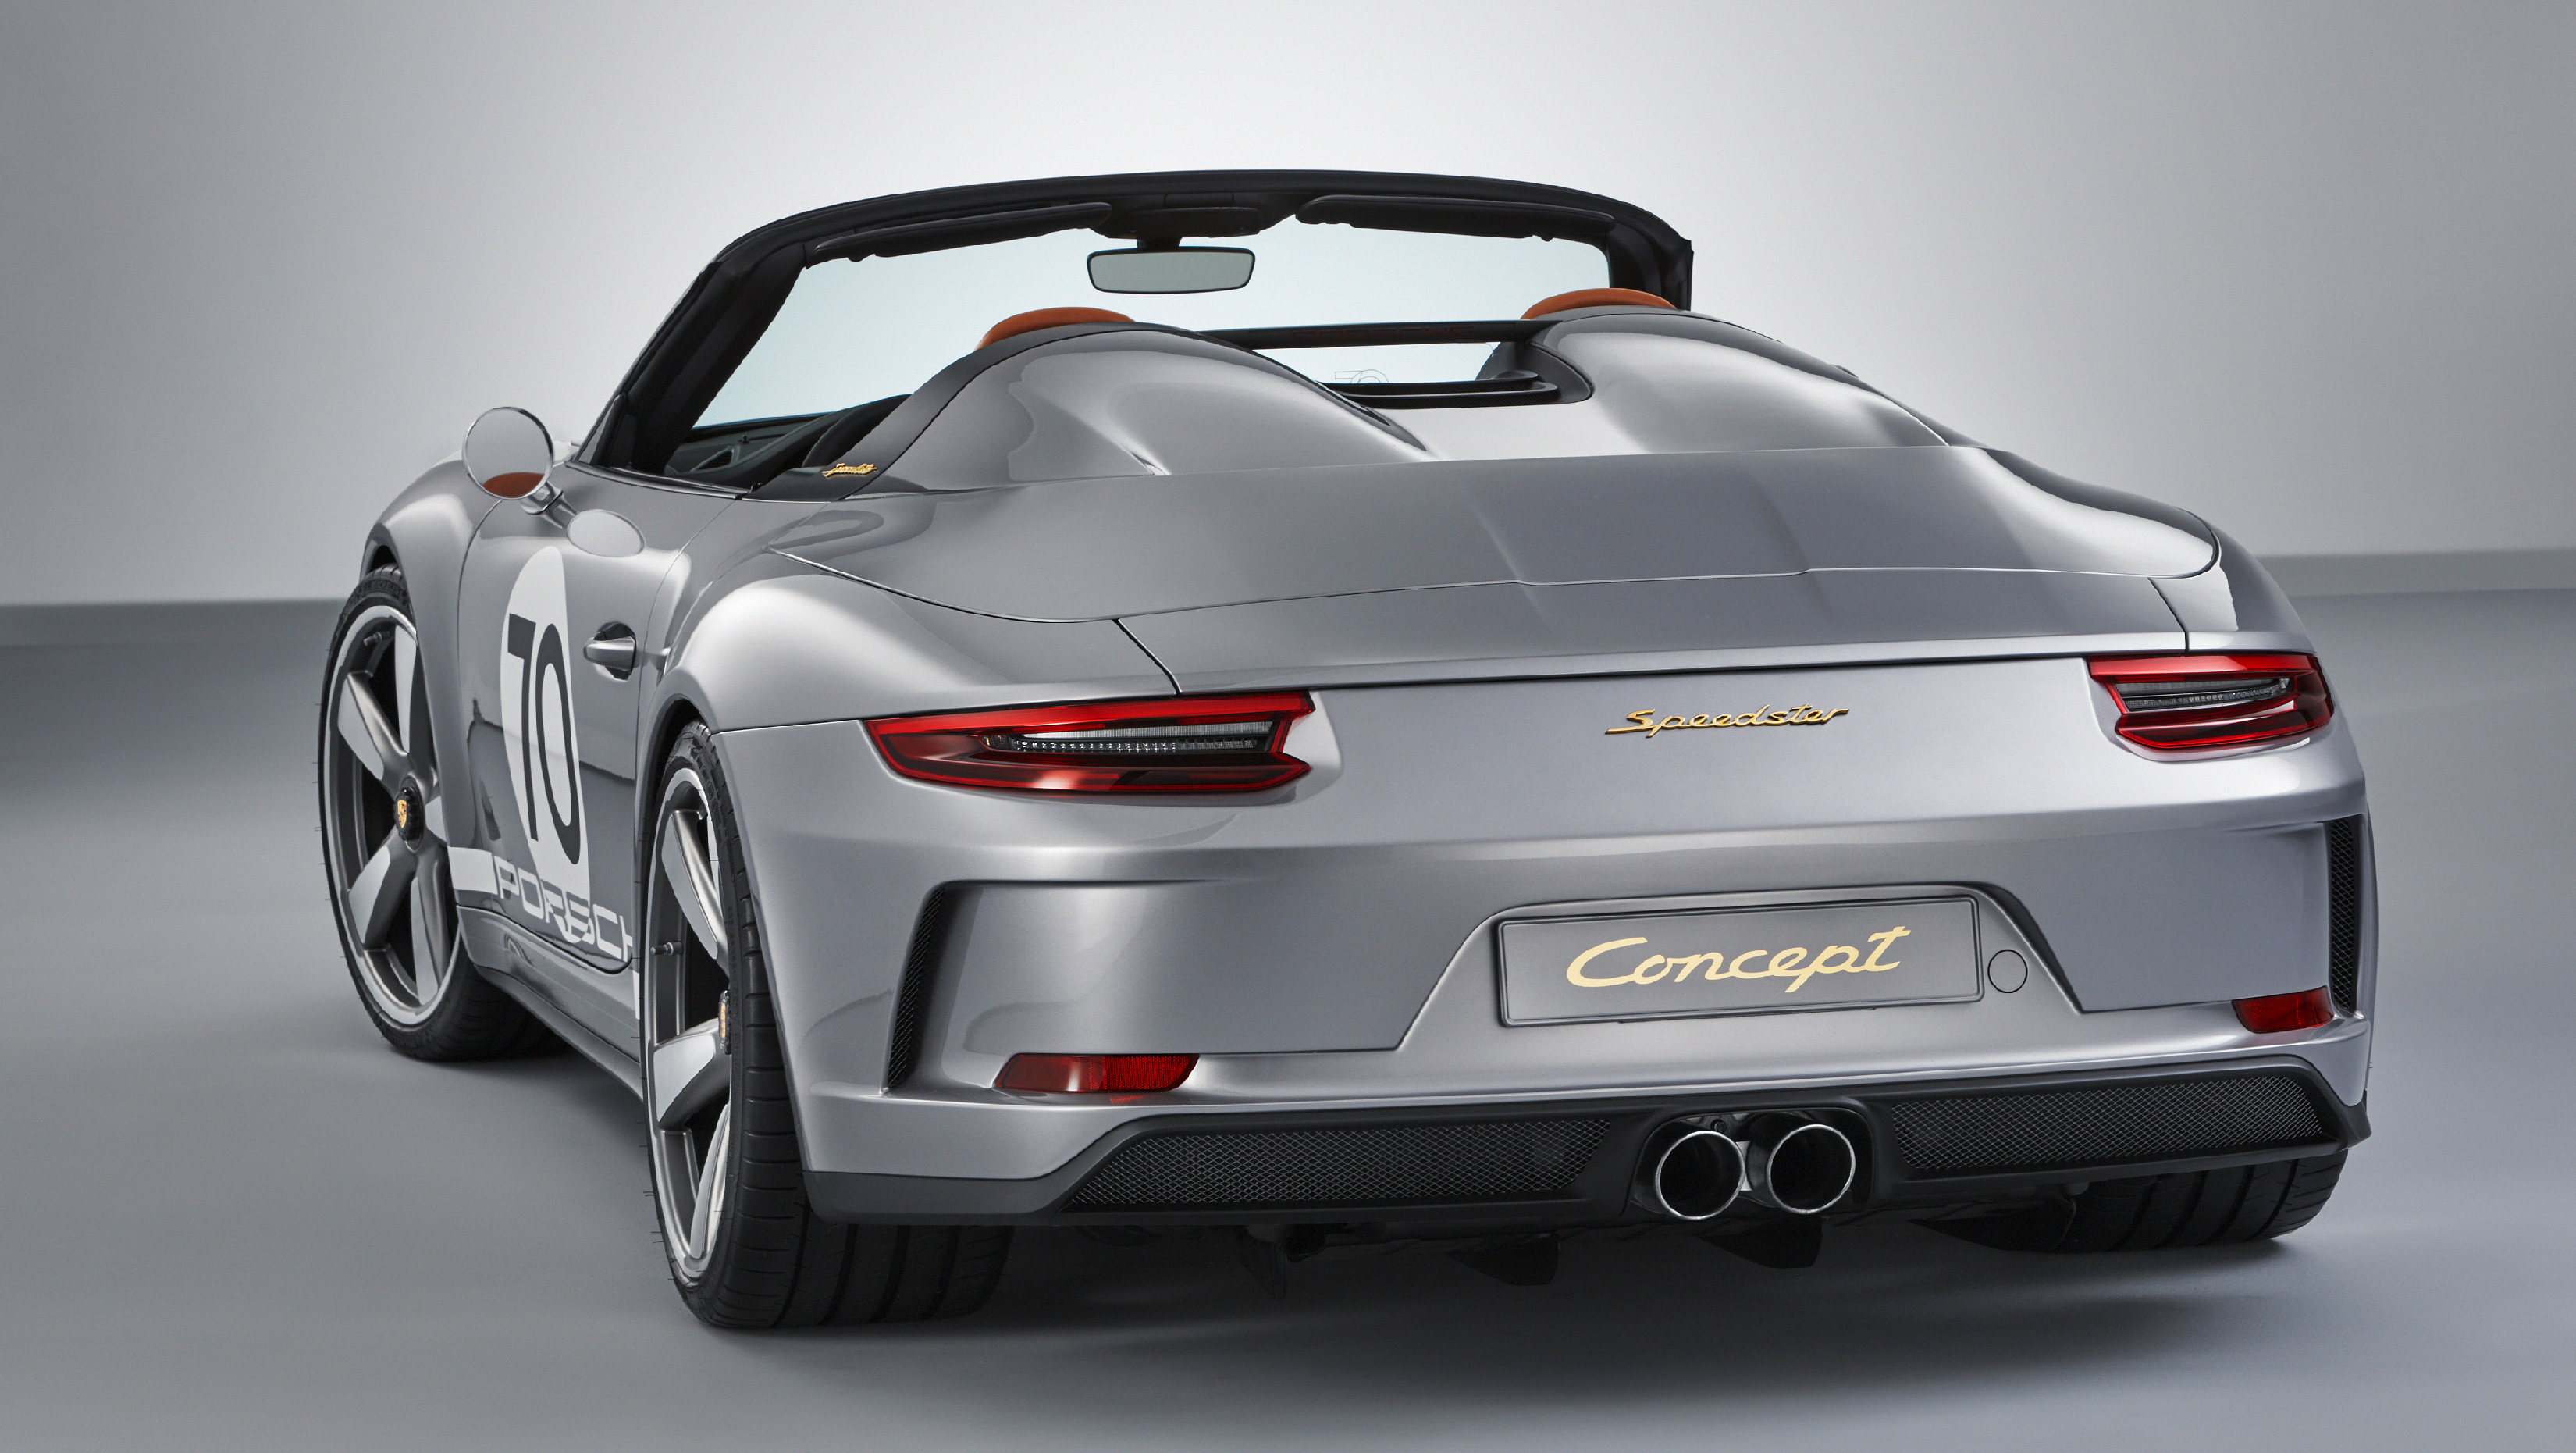 500hp porsche 911 speedster coming in 2019 as limited edition model 3679685 concept 2018 ag